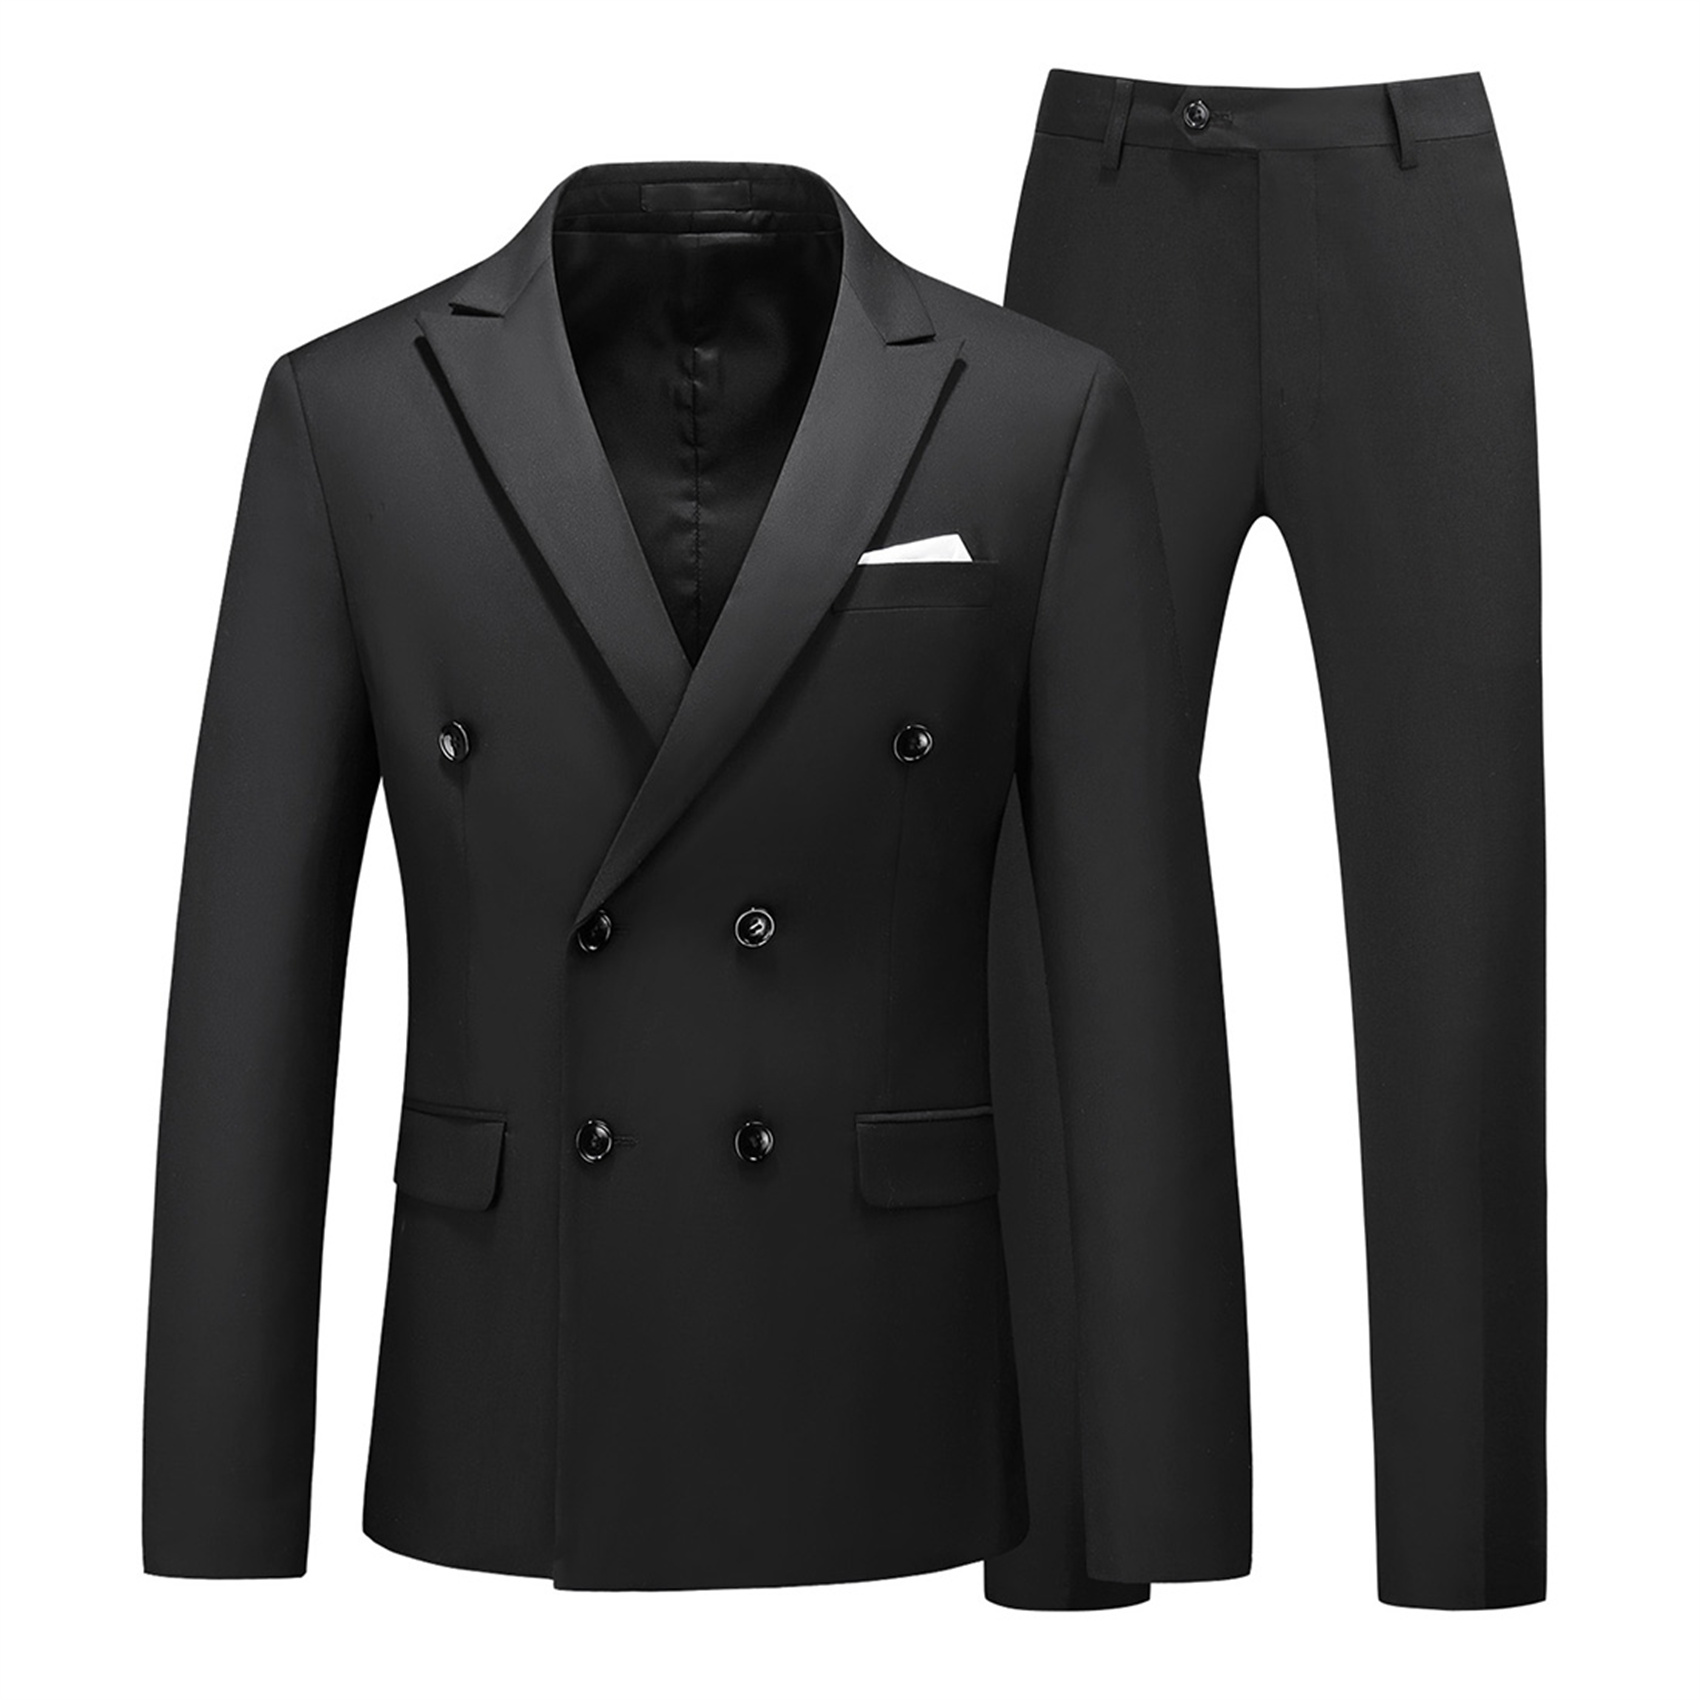 2 Piece Double Breasted Suit for Men, Slim Fit, Black